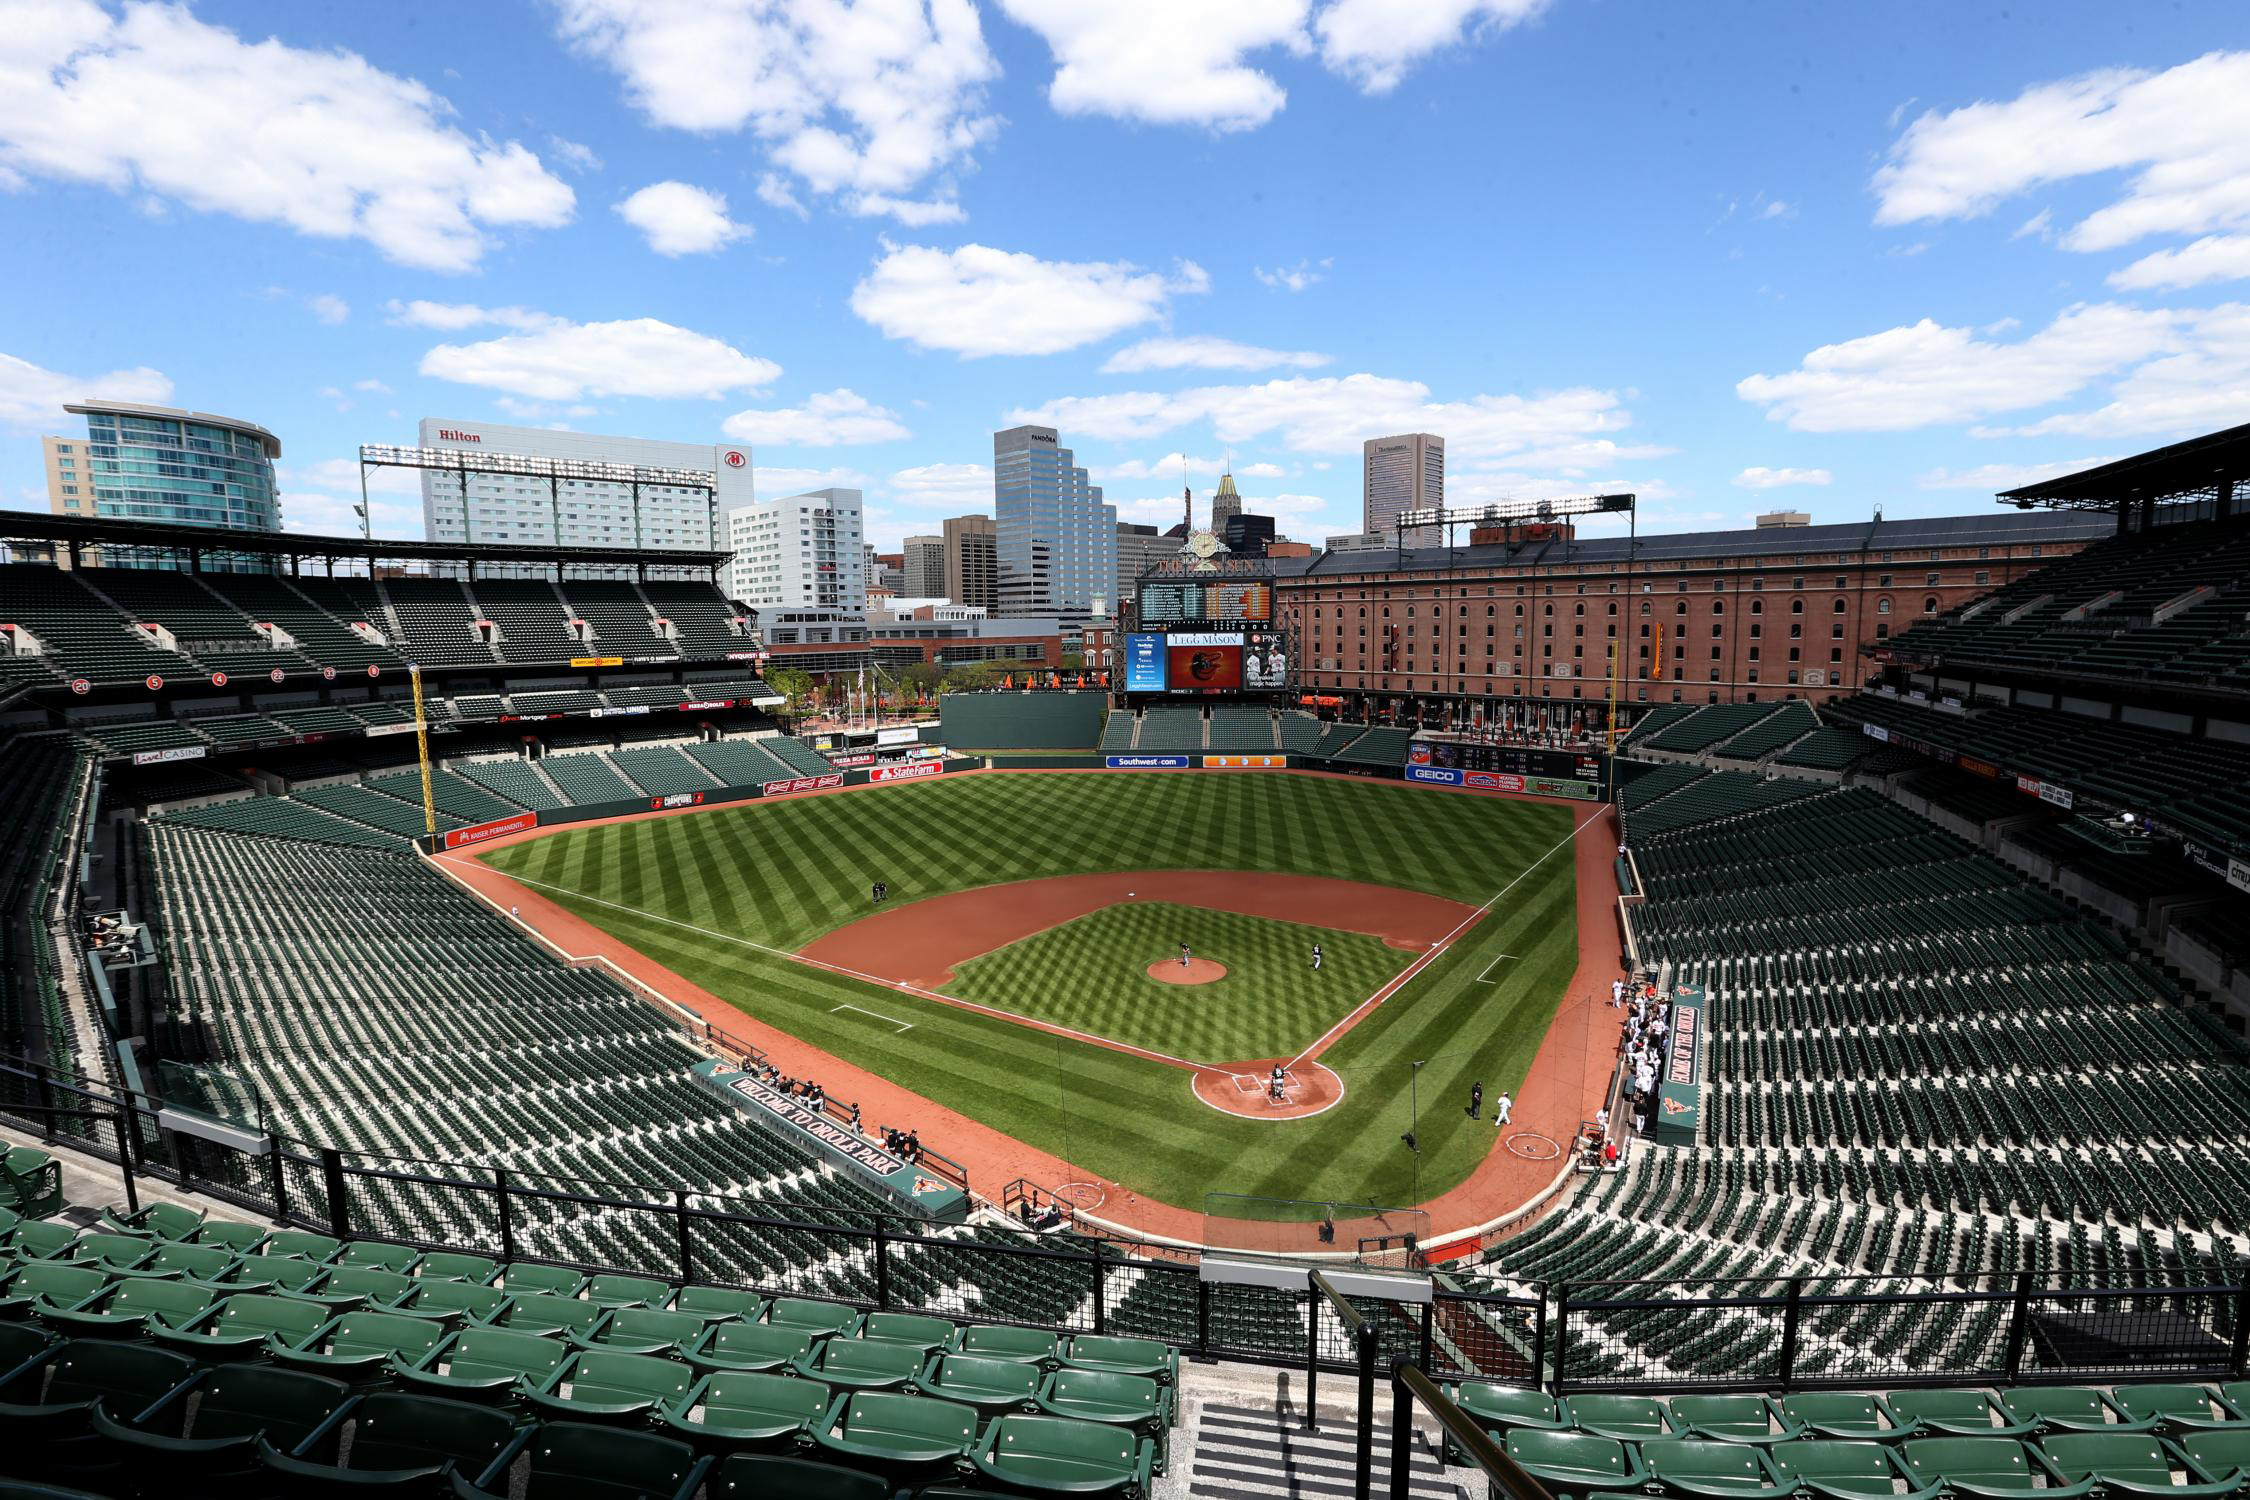 2015 Baltimore protests: A baseball game between the Baltimore Orioles and the Chicago White Sox sets the all-time low attendance mark for Major League Baseball.